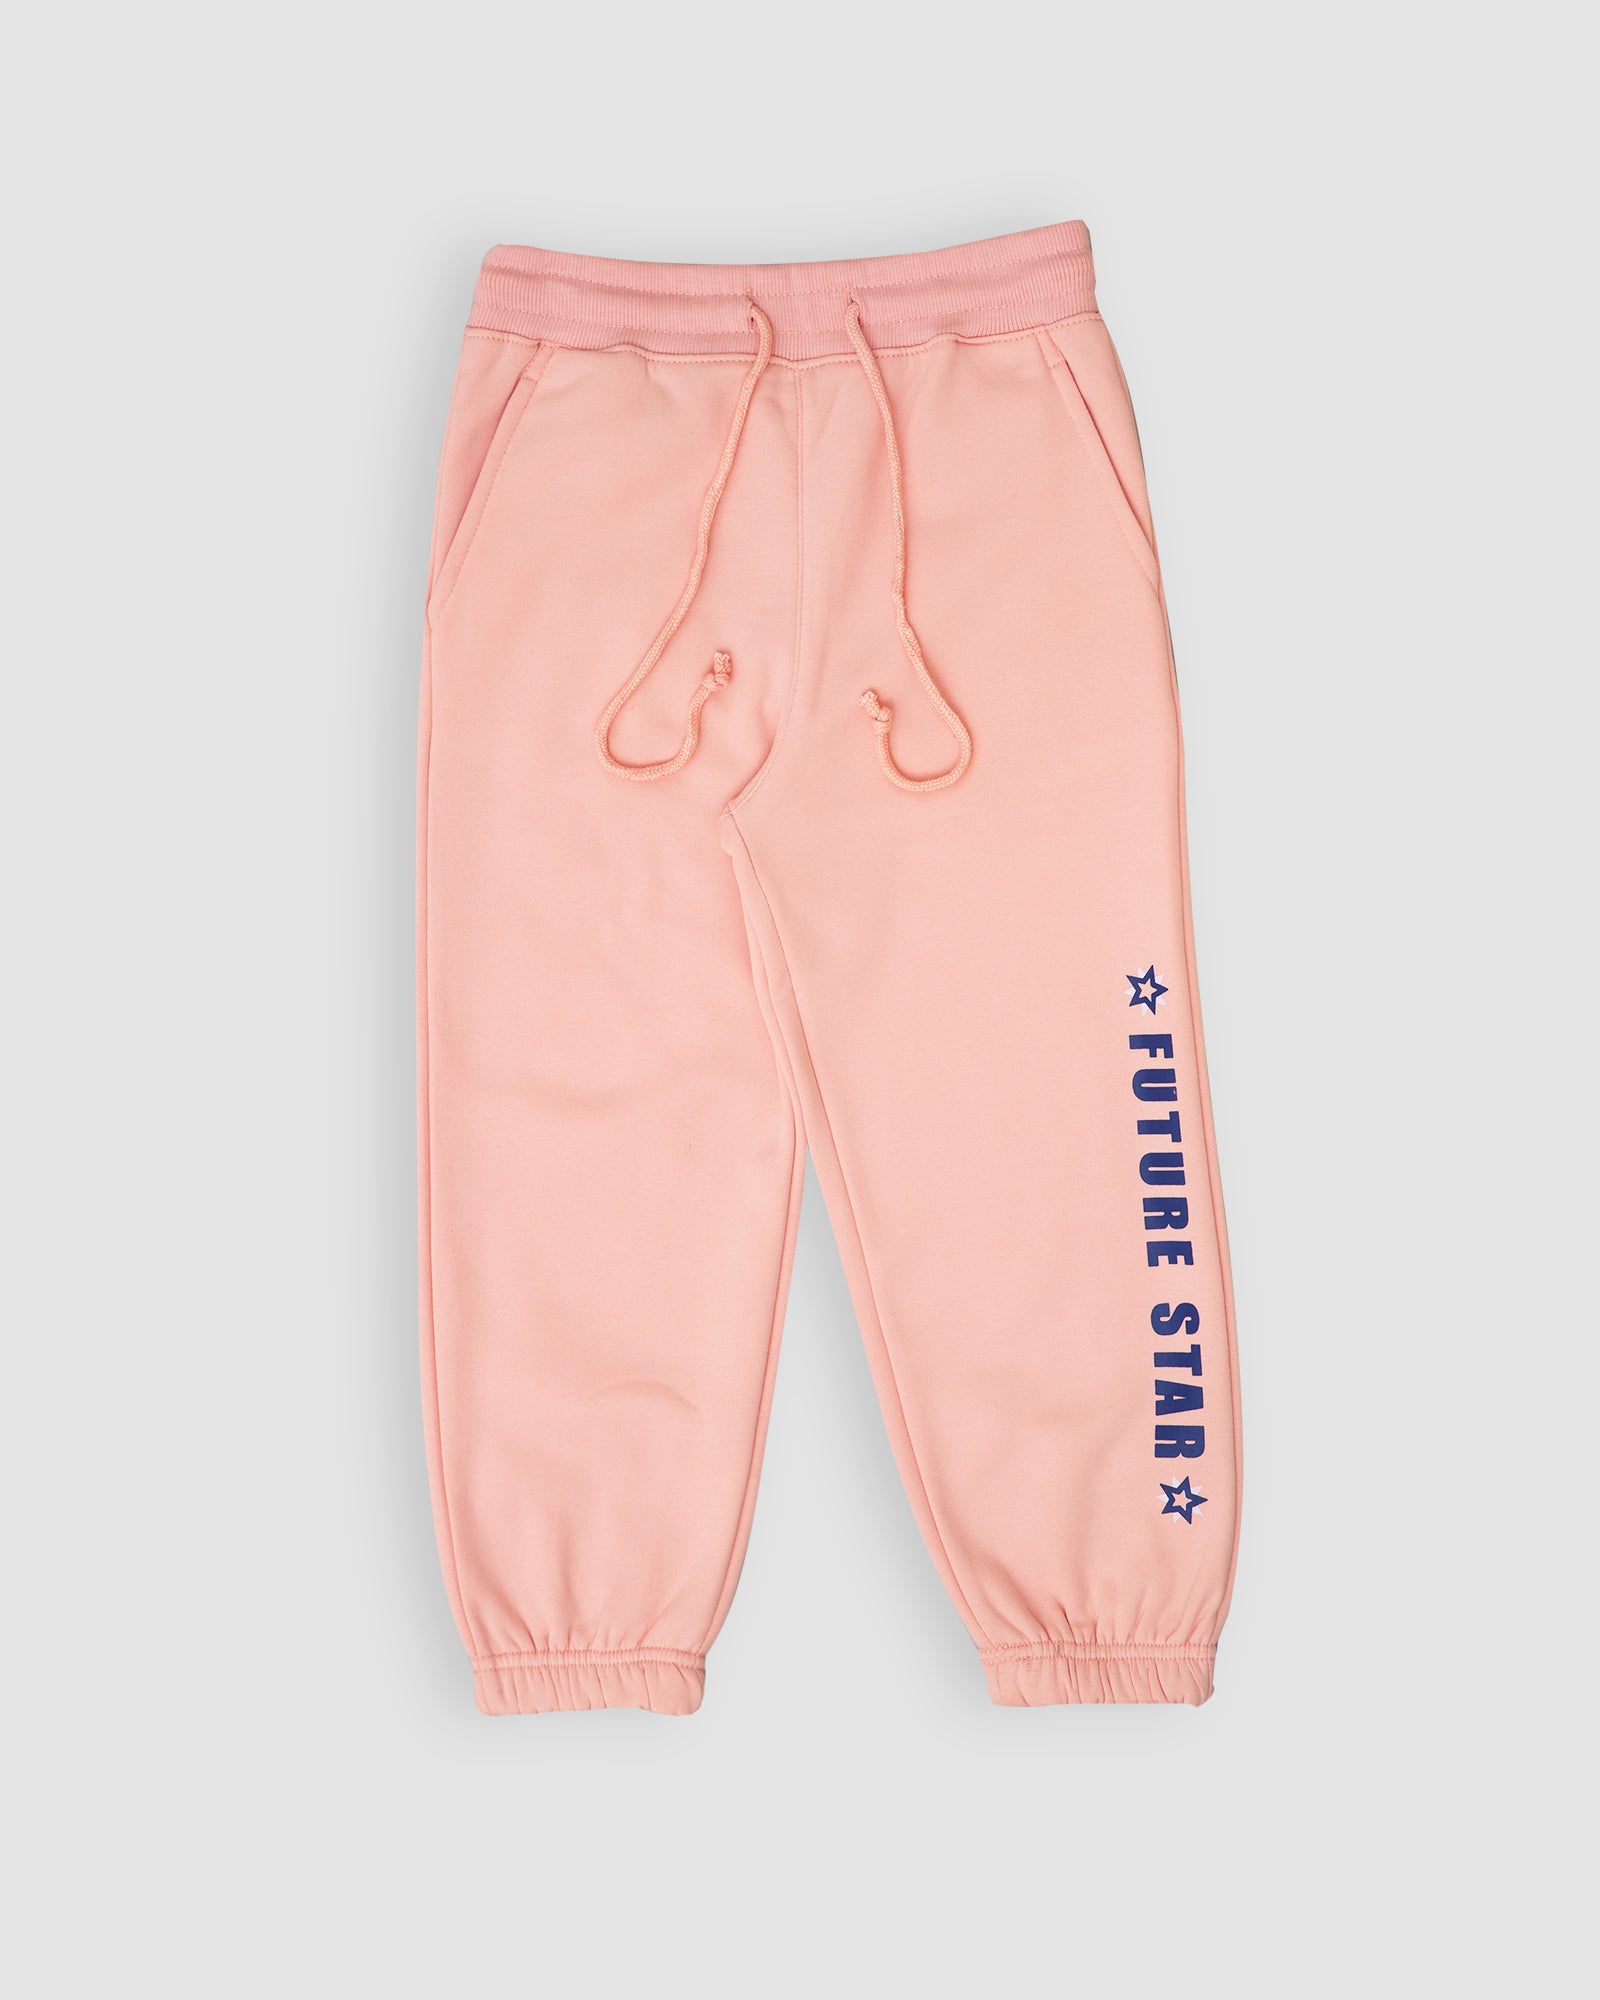 GRAPHIC FASHION TROUSER PINK